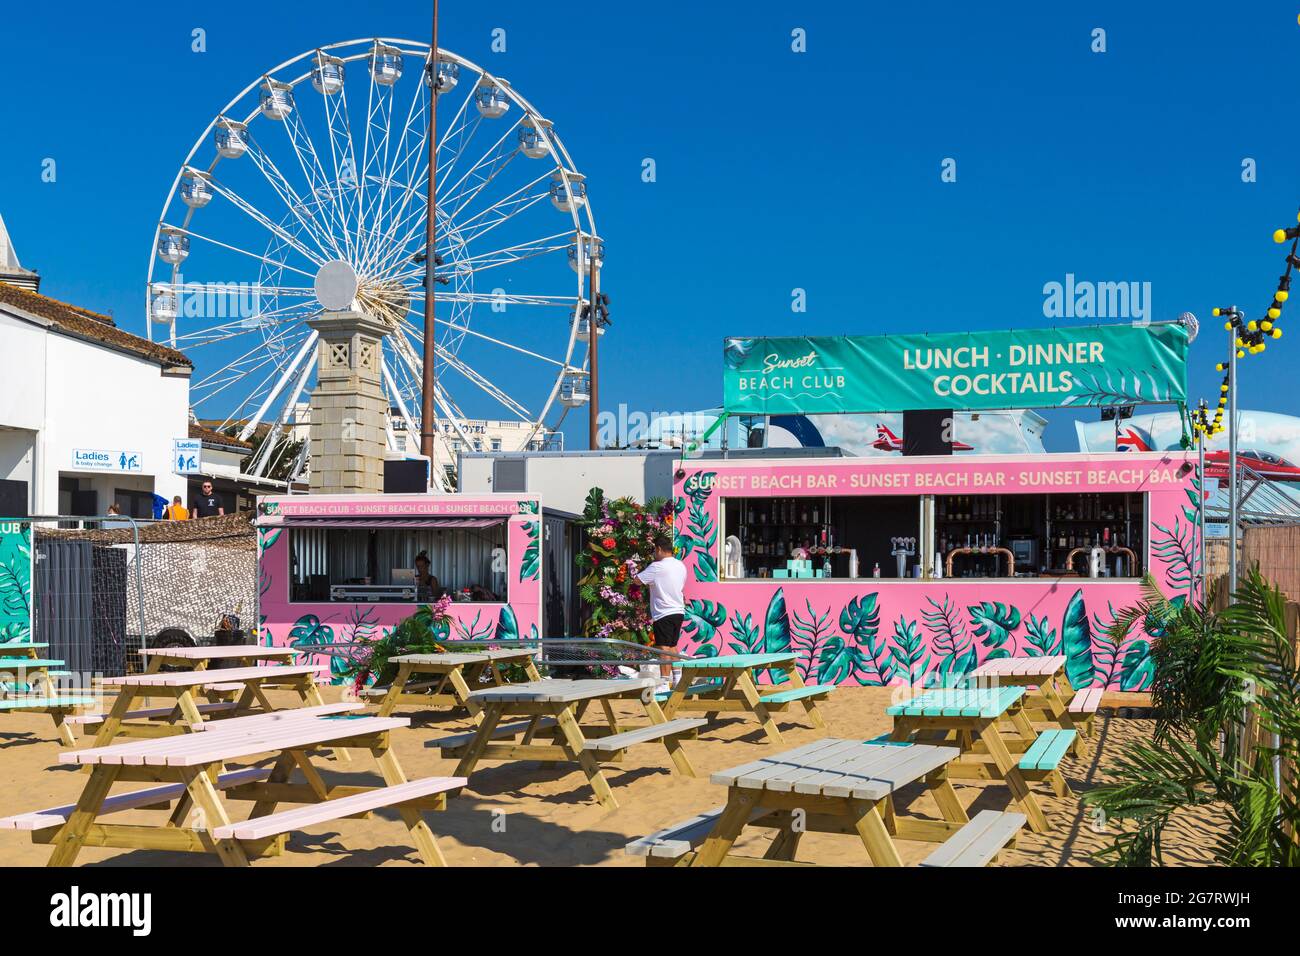 Bournemouth, Dorset UK. 16 July 2021. Sunset Beach Club opens on  Bournemouth beach this lunchtime offering a new restaurant and beach bar,  taking inspiration from the Balearic Islands and Bali. Run by